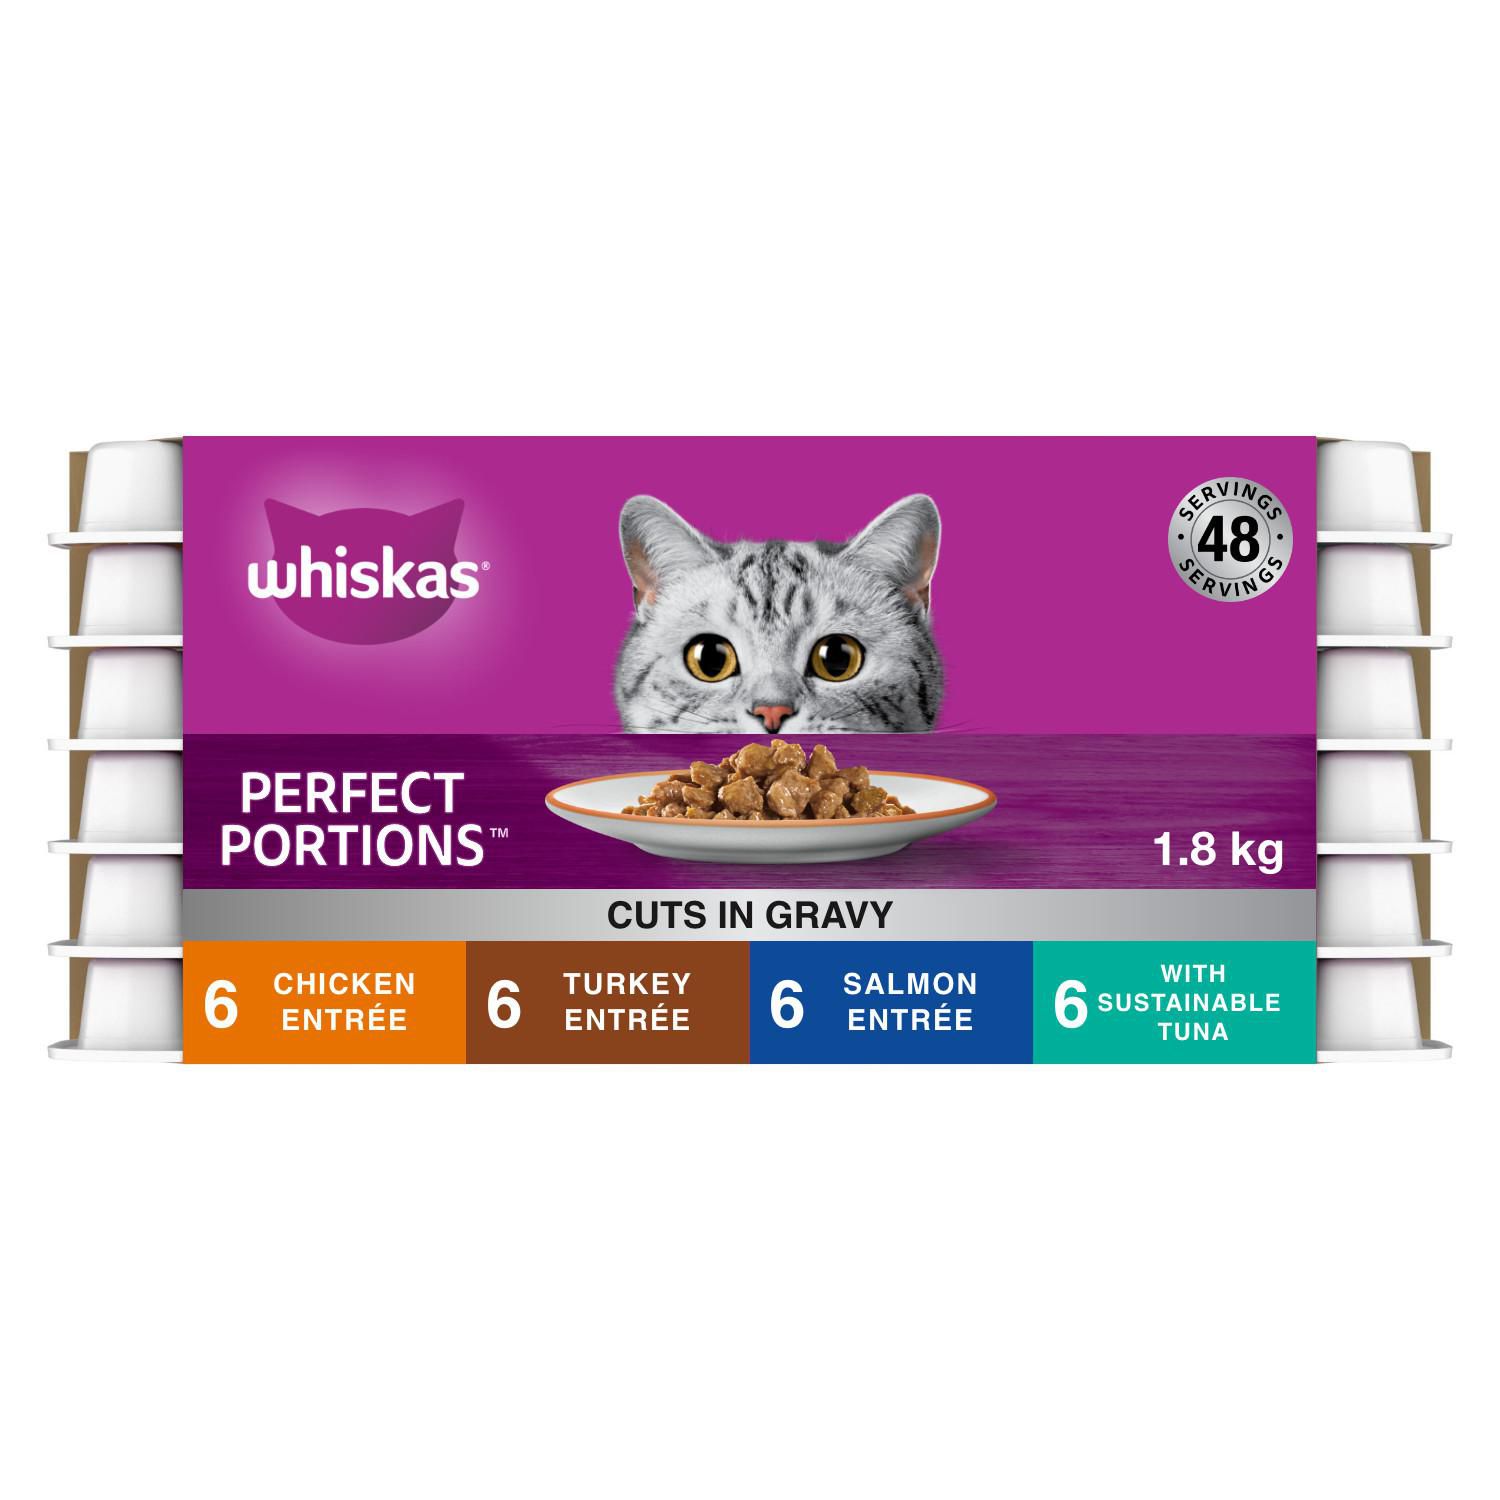 Whiskas Perfect Portions Cuts in Gravy Variety Pack Wet Cat Food